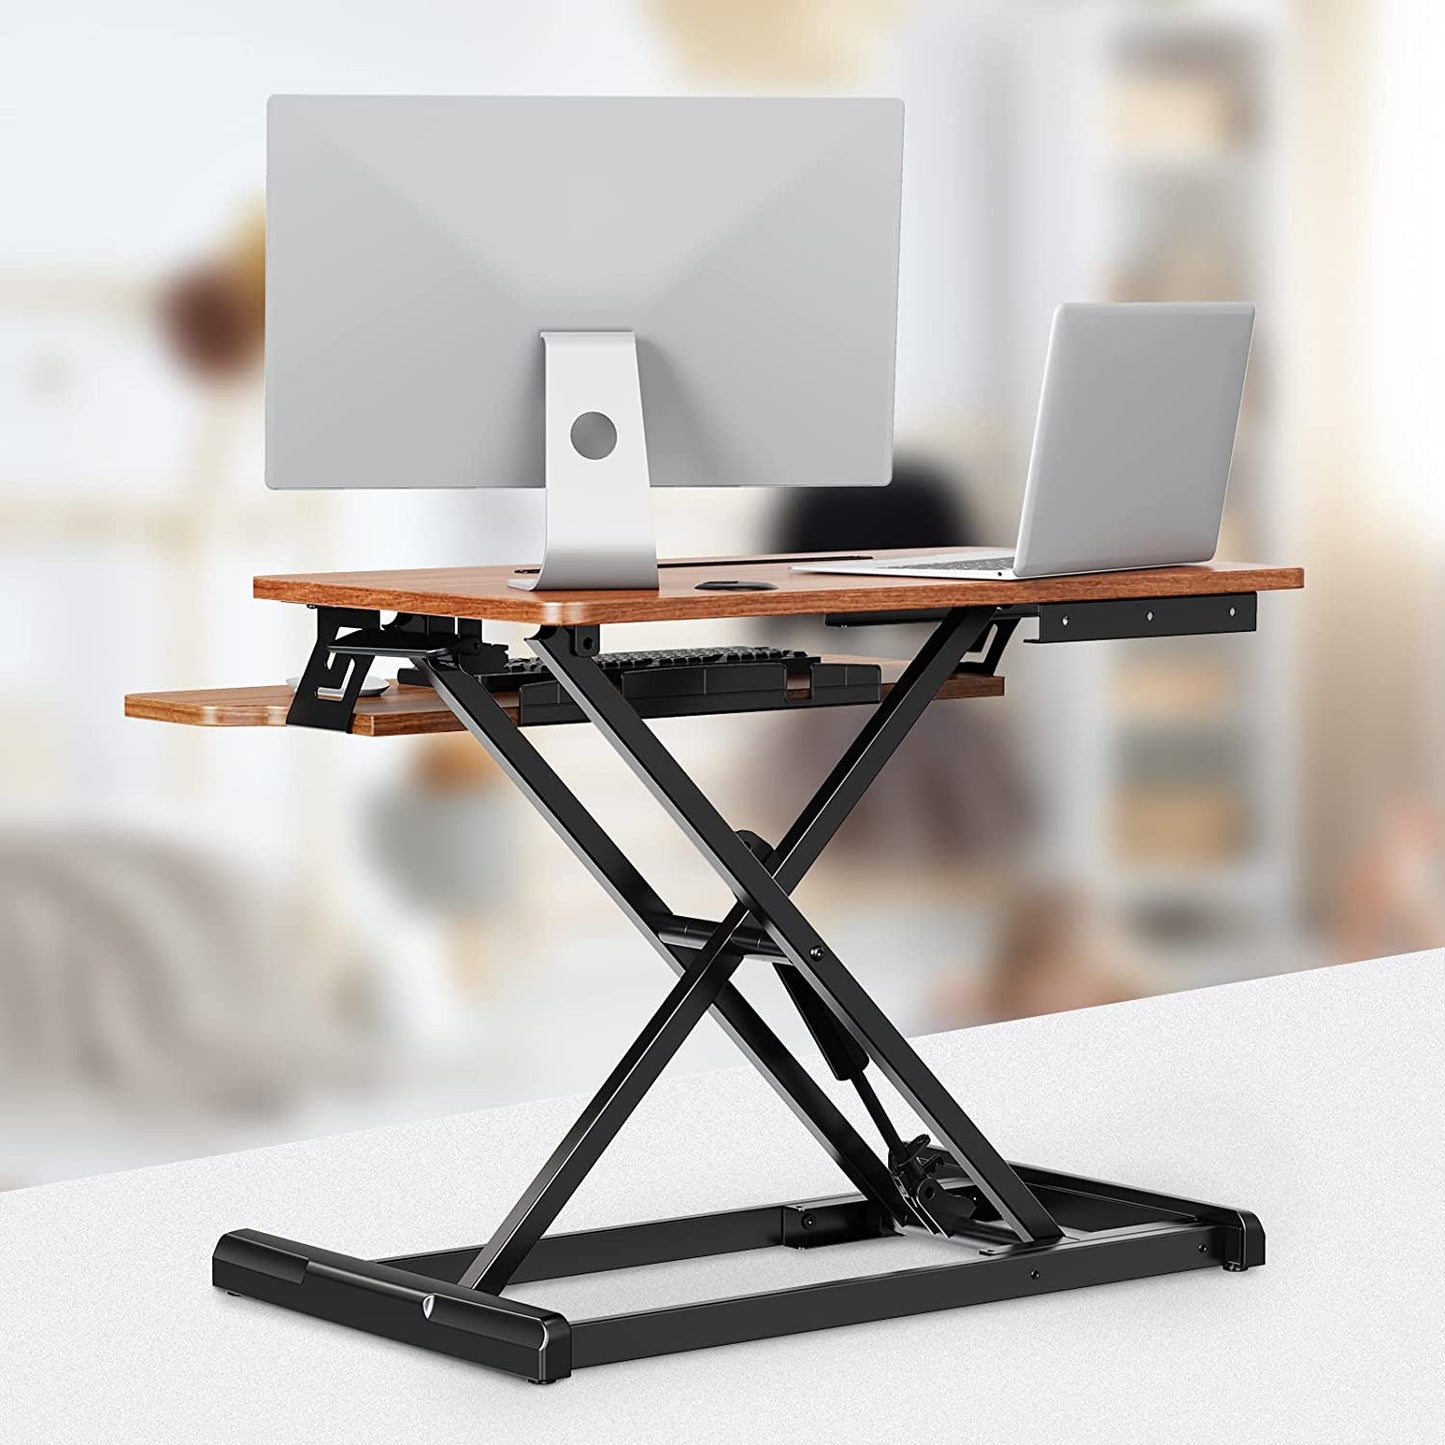 quickly transform a traditional desk to a standing desk Brown